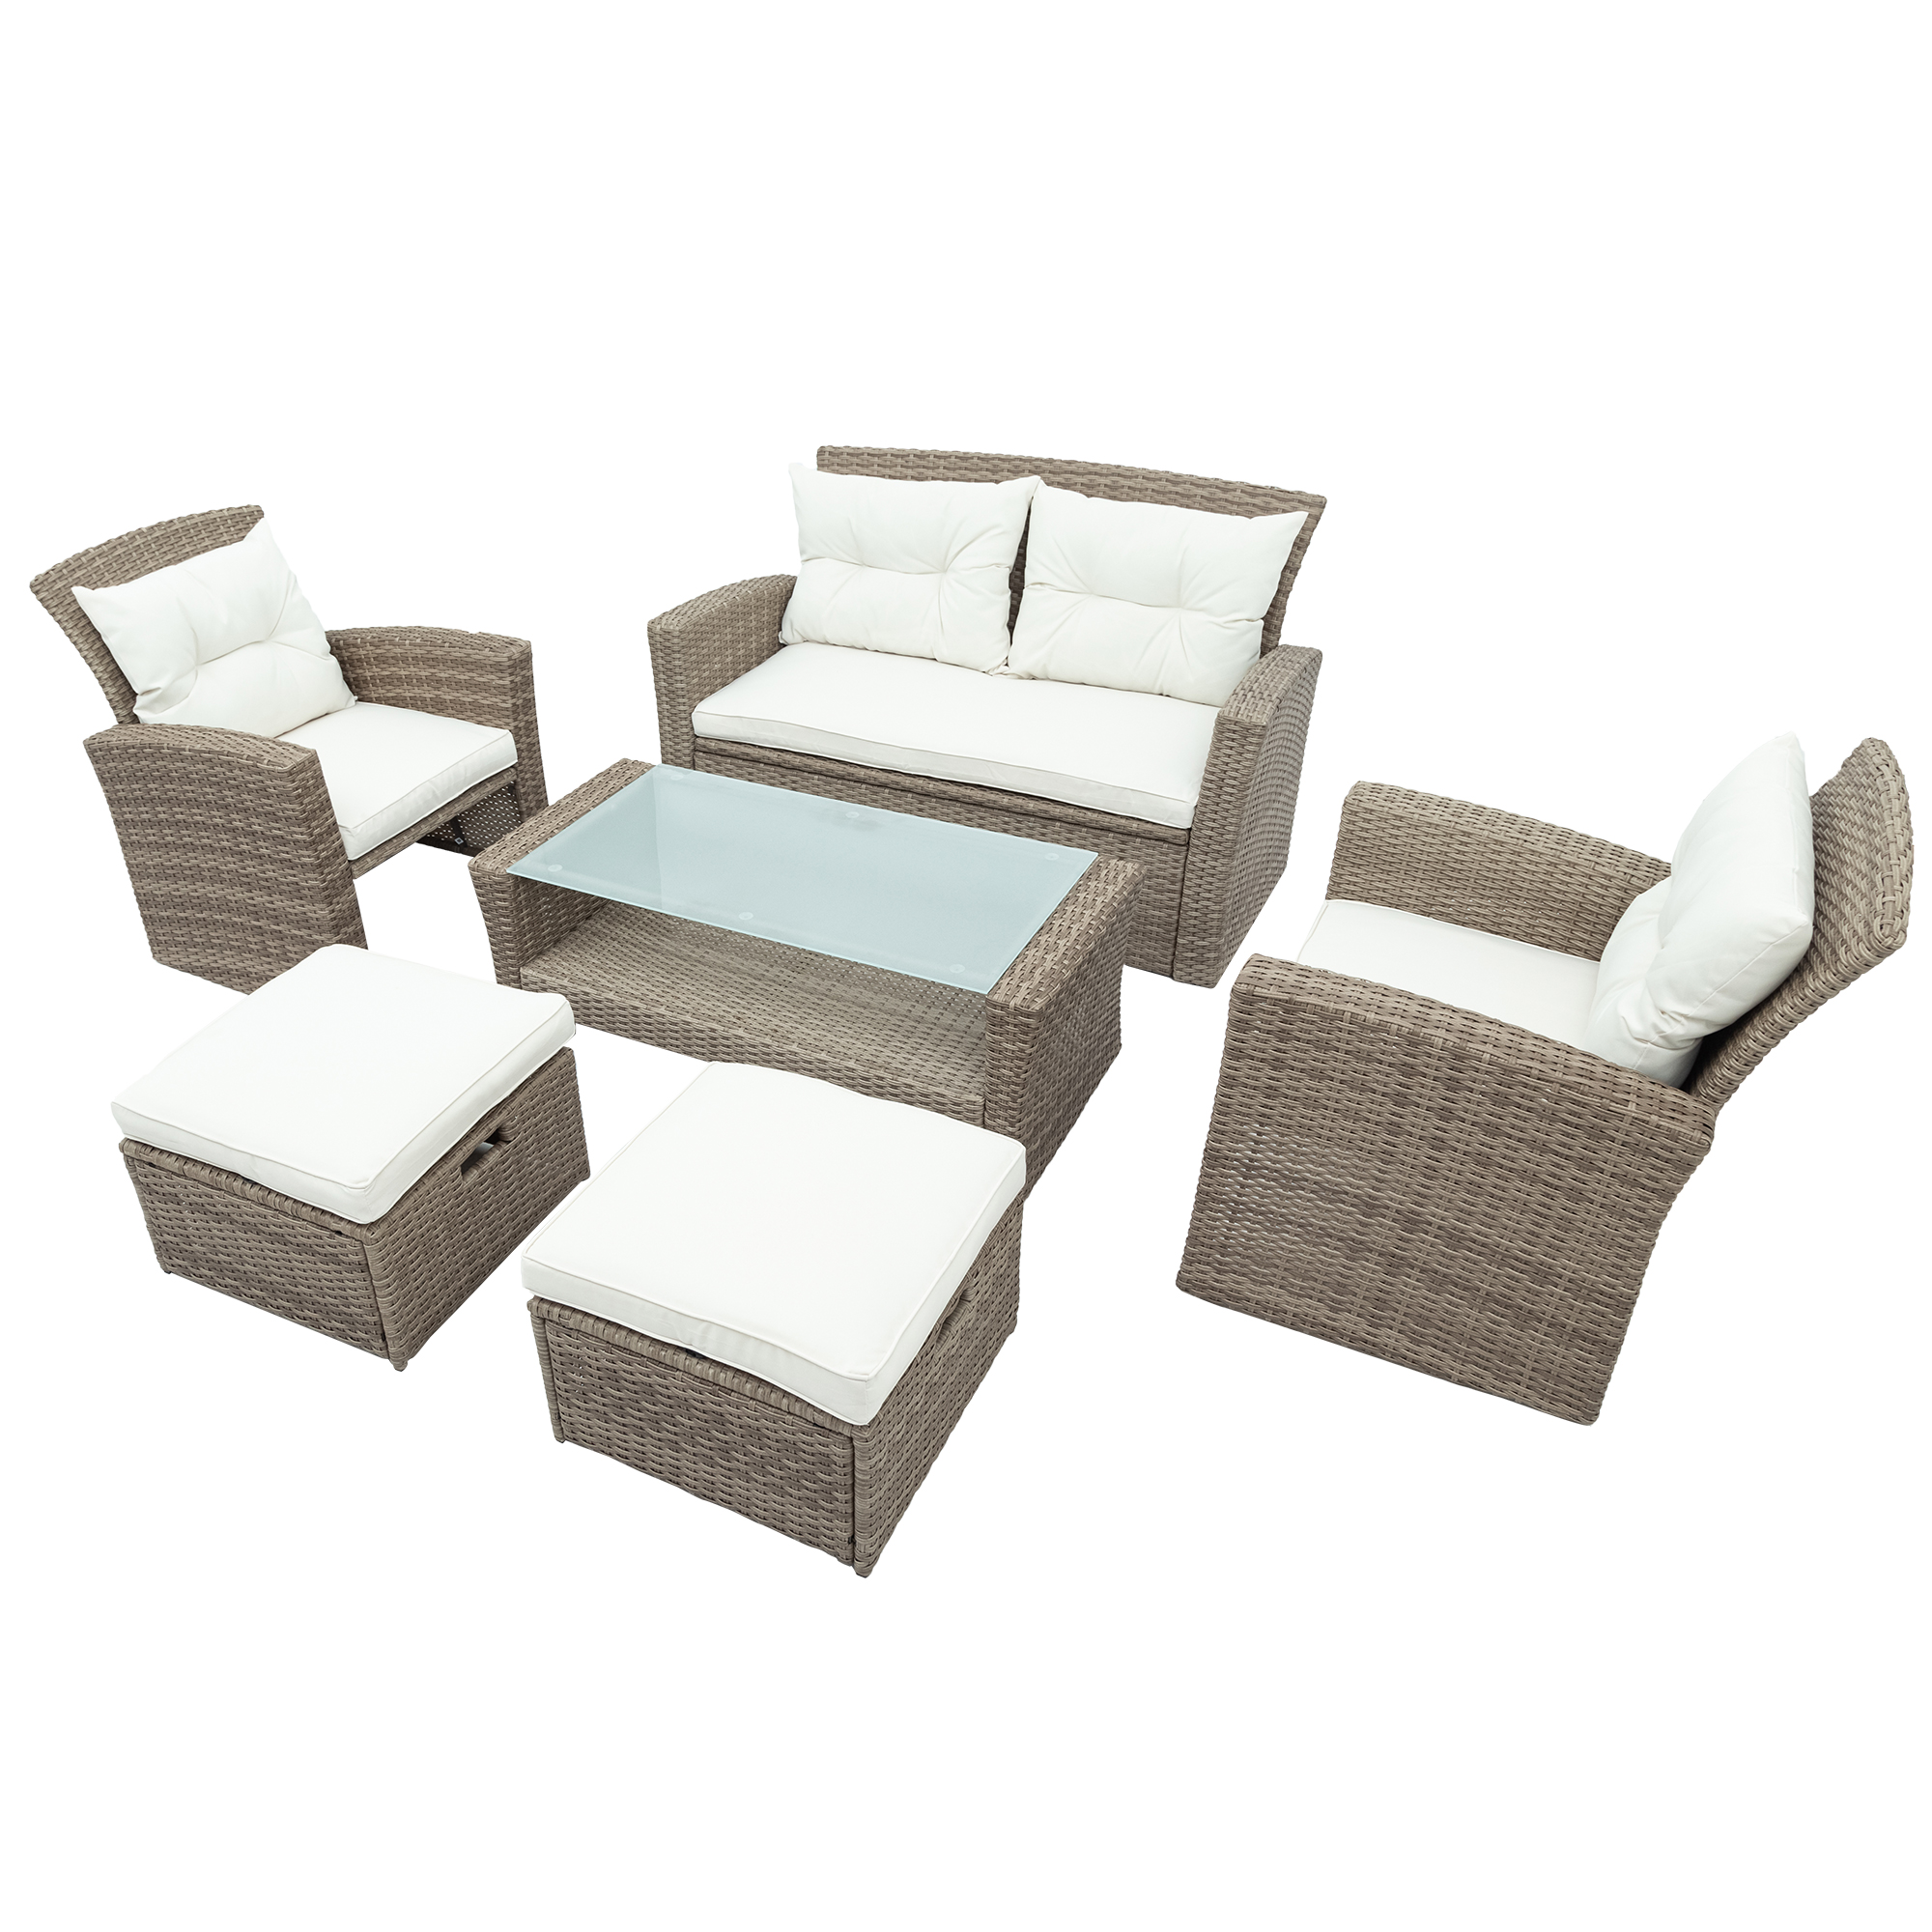 SESSLIFE 6 Piece Wicker Patio Furniture Set, Outdoor Sectional Sofa with Table, Ottoman and Washable Cushions, Patio Seating Sets for Lawn Porch Poolside - image 4 of 9